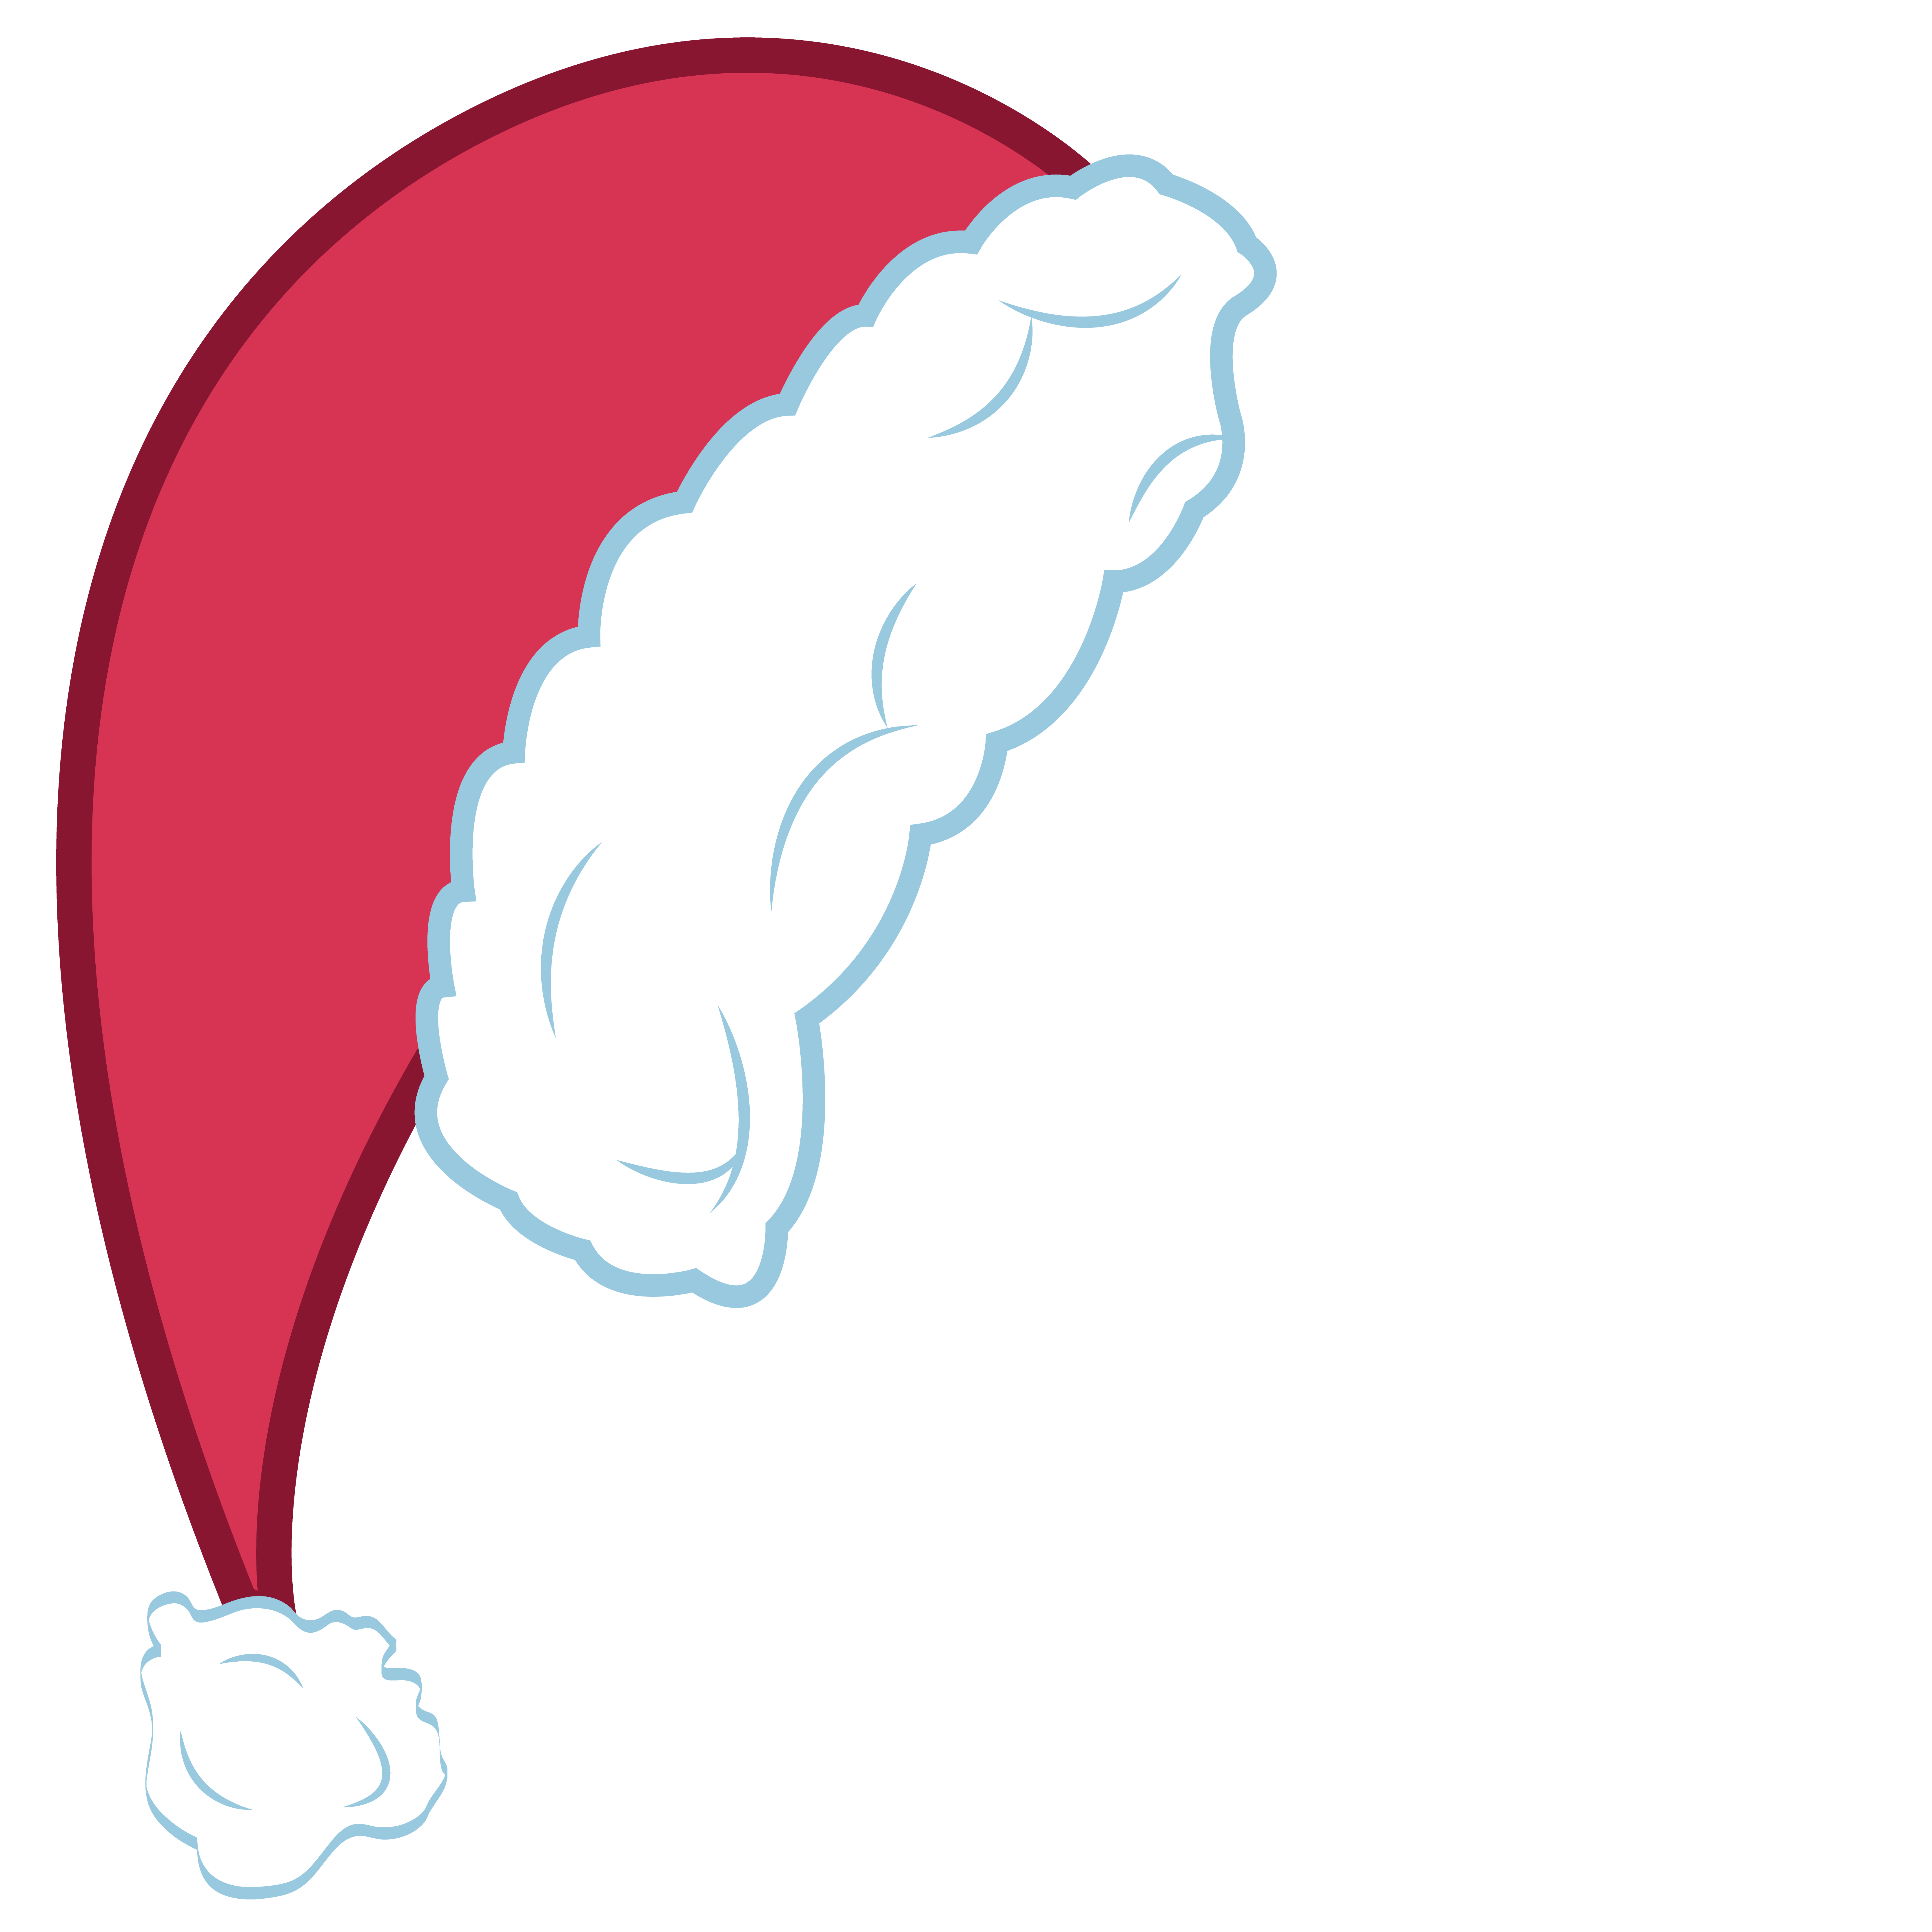 Clipart library: More Like santa hat by - Clipart library - Clipart library